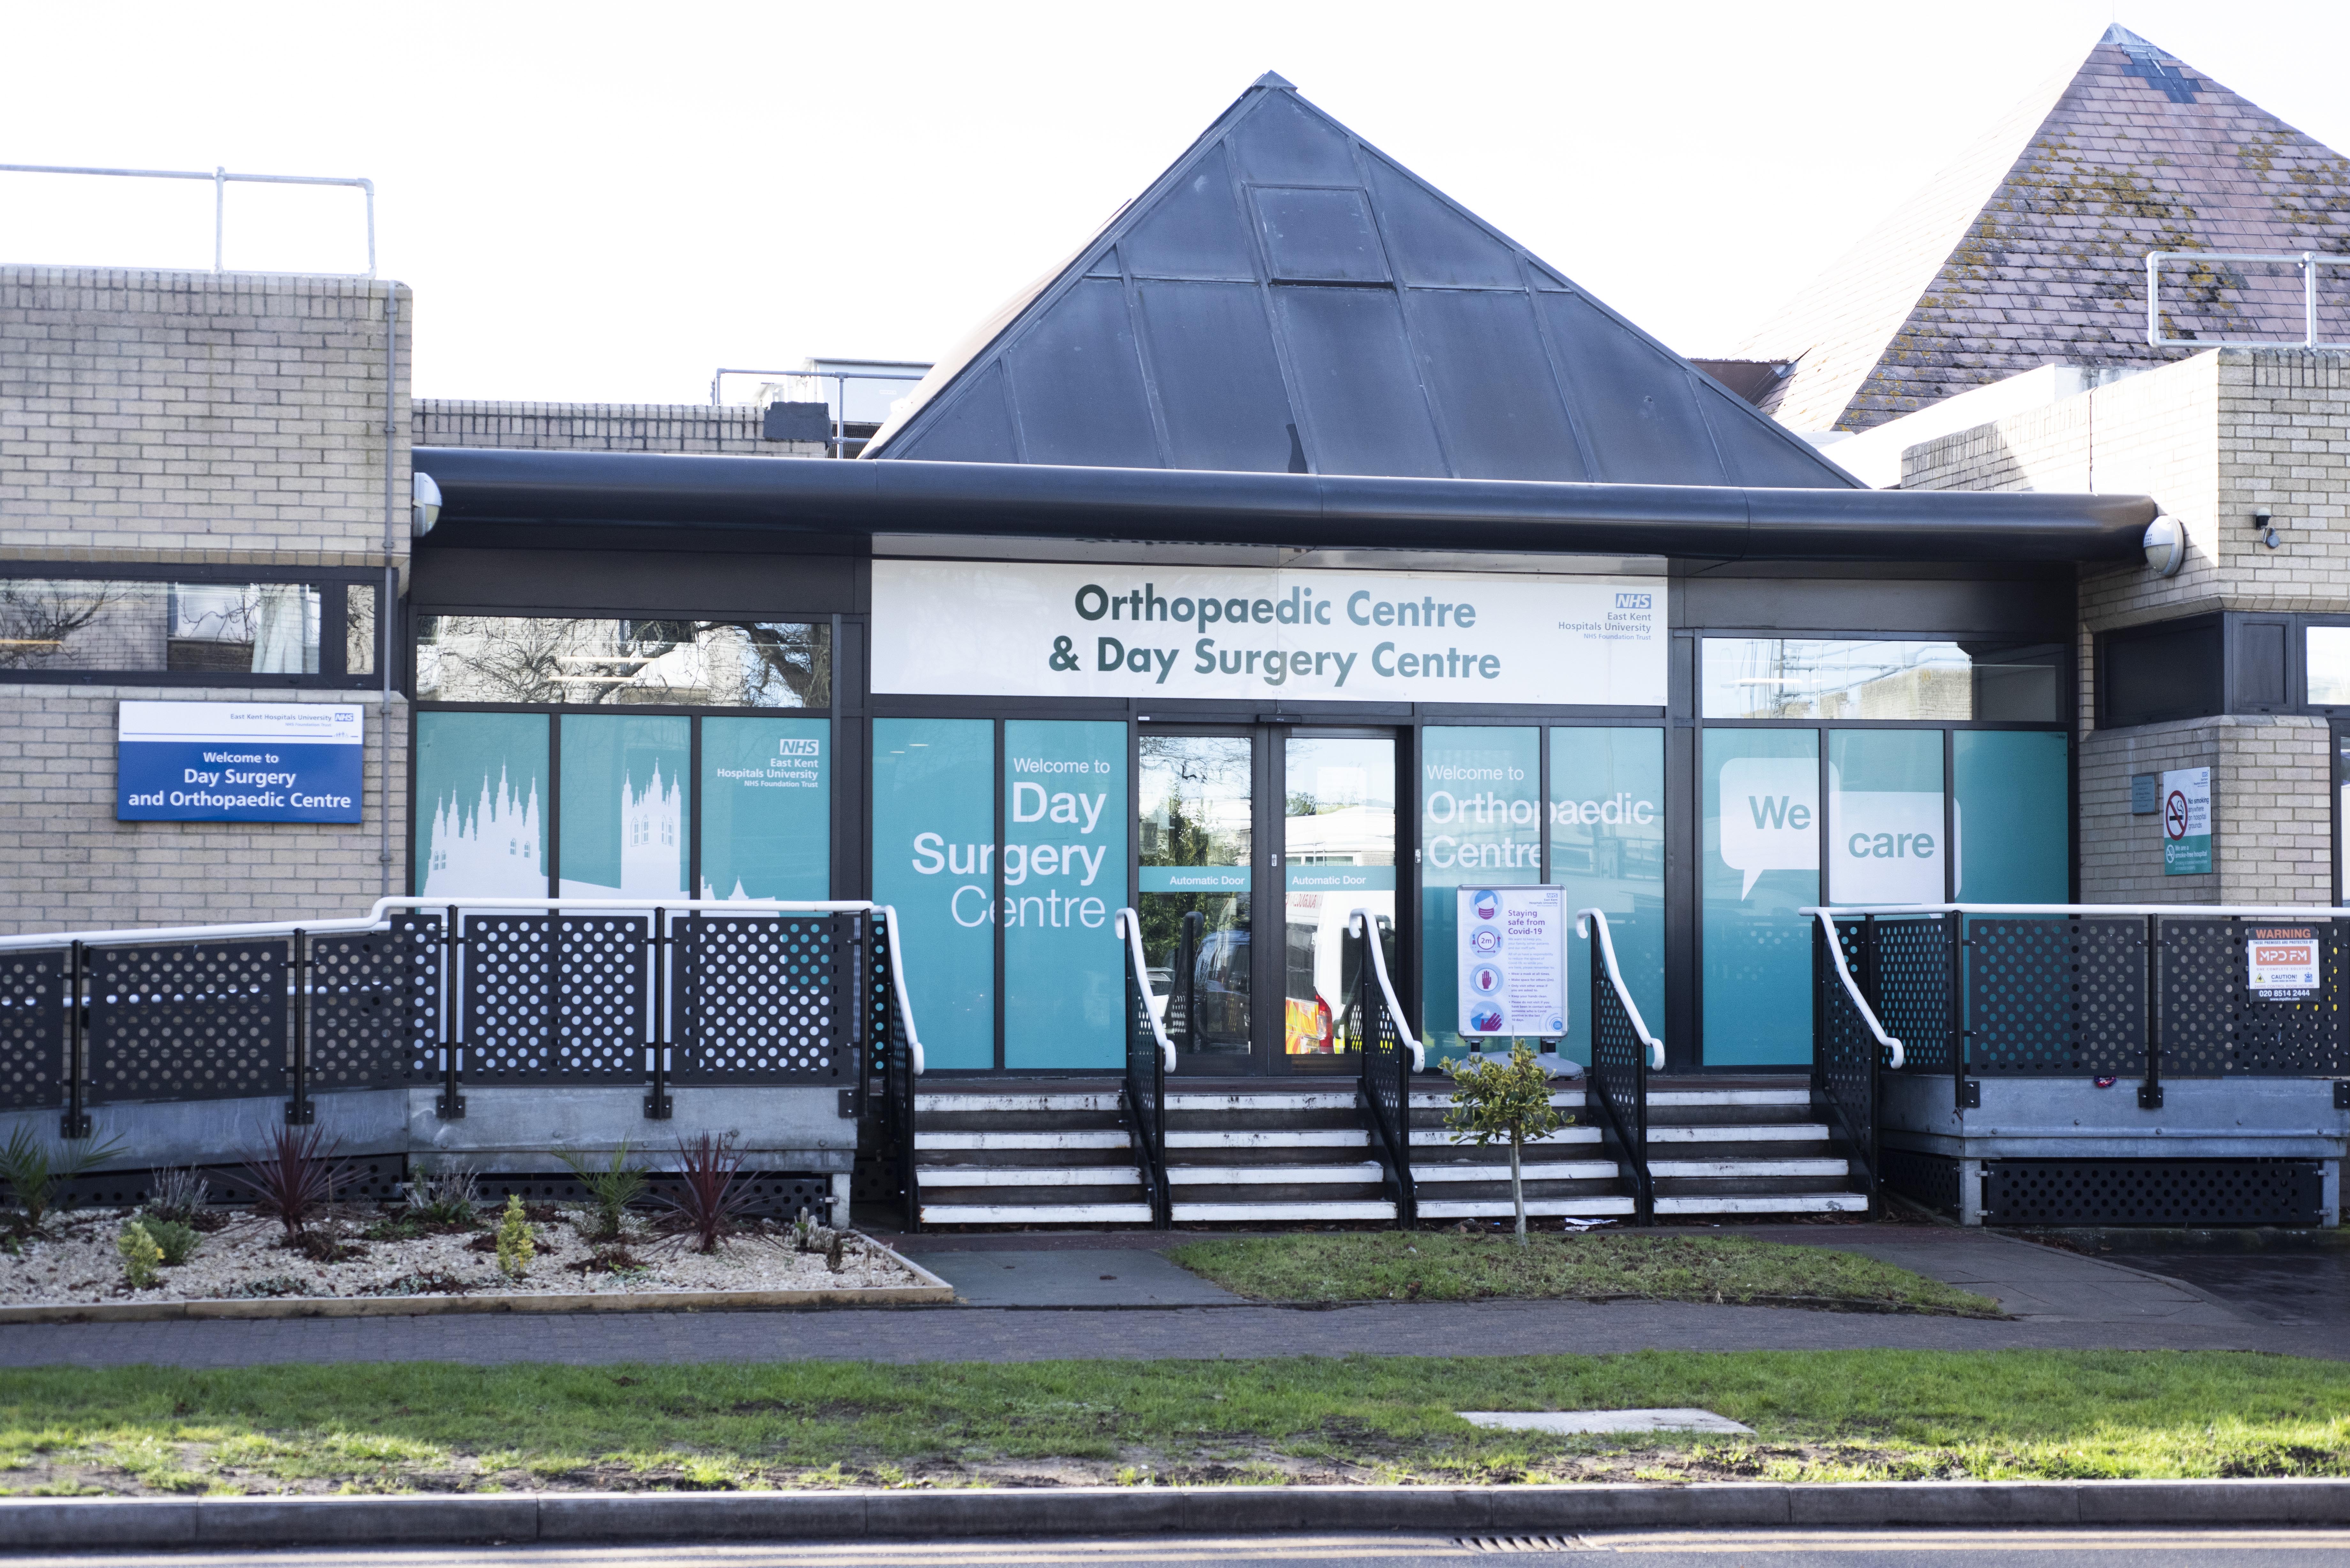 Photo showing entrance to the Orthopaedic Centre and Day Surgery Centre at Kent and Canterbury Hospital